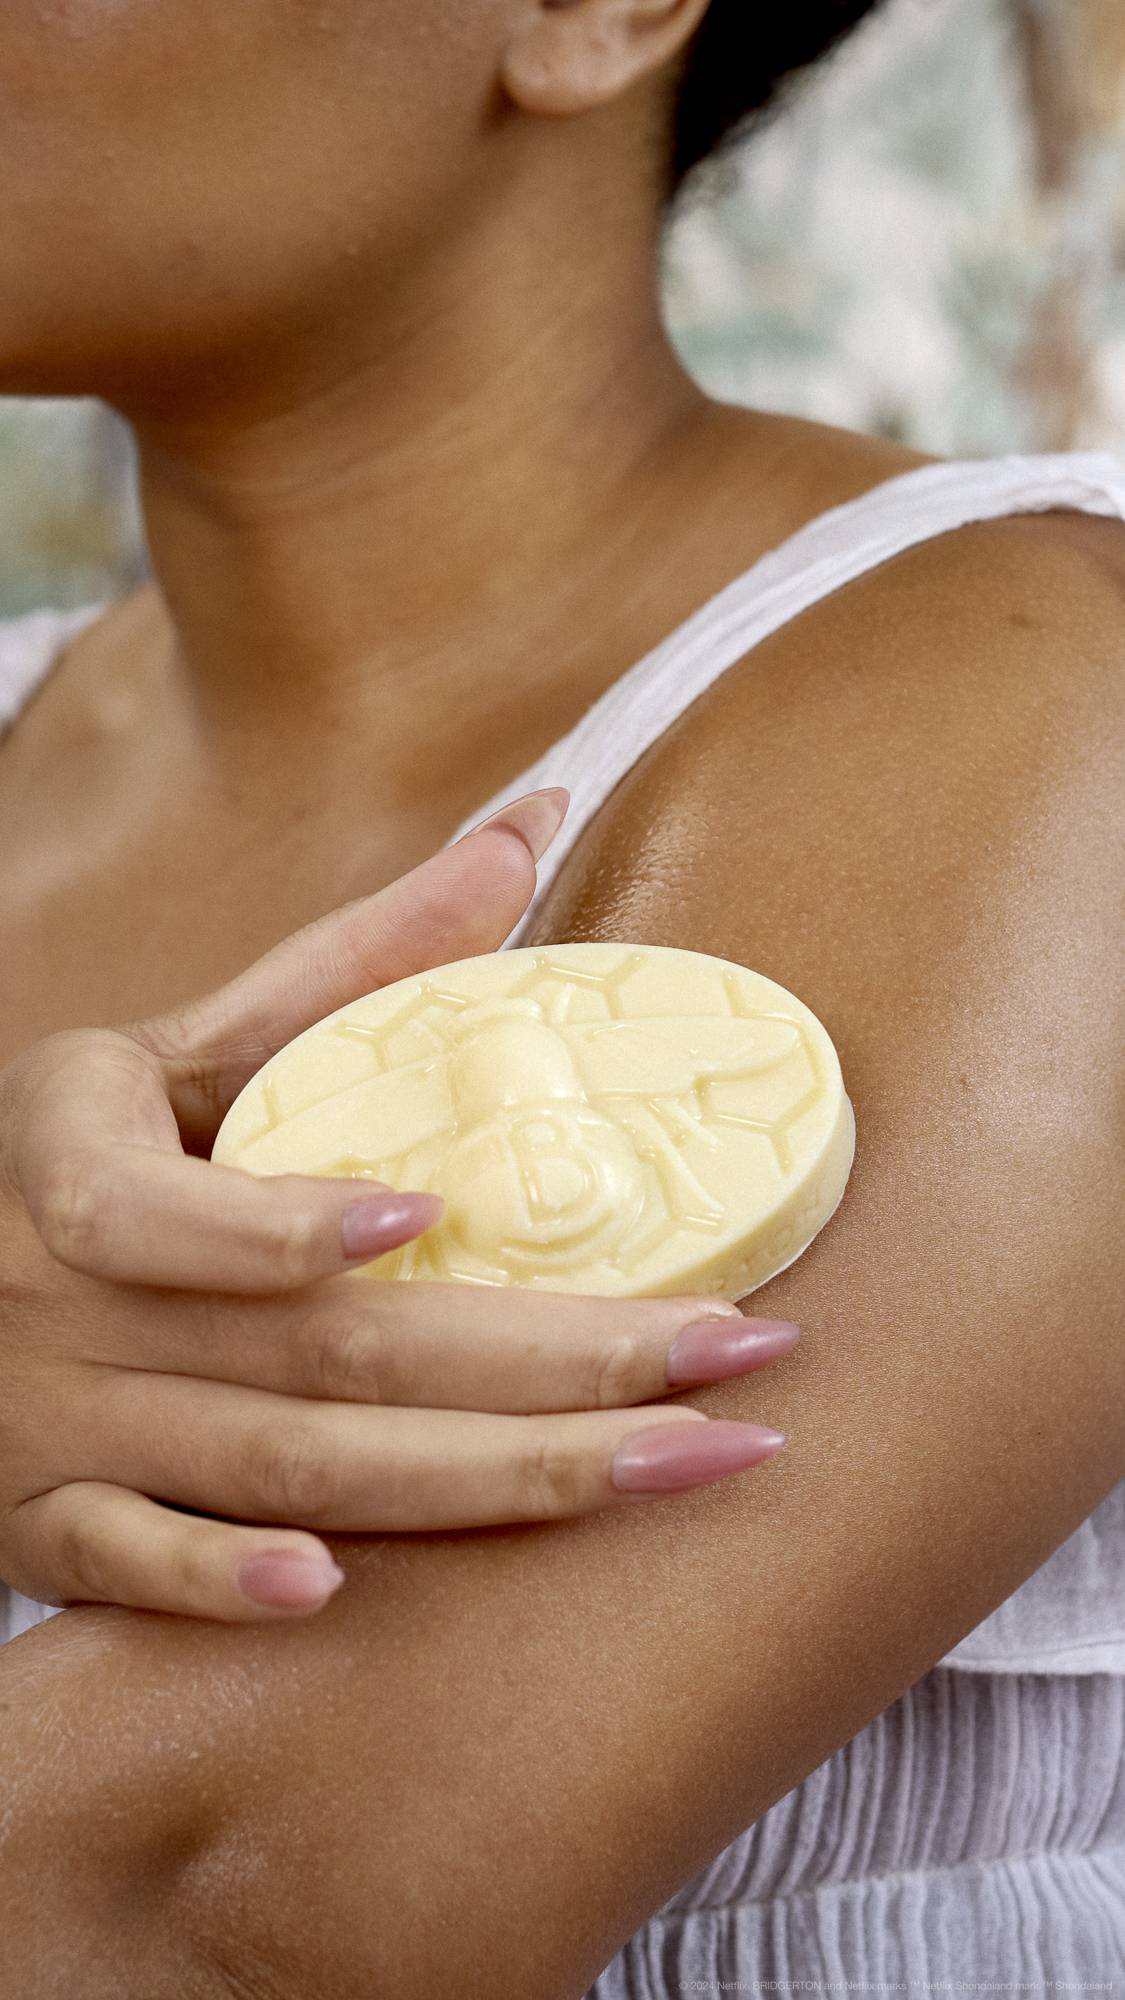 A close-up of the model's upper arm focuses on the Bee solid body balm as they apply it over their shoulder.